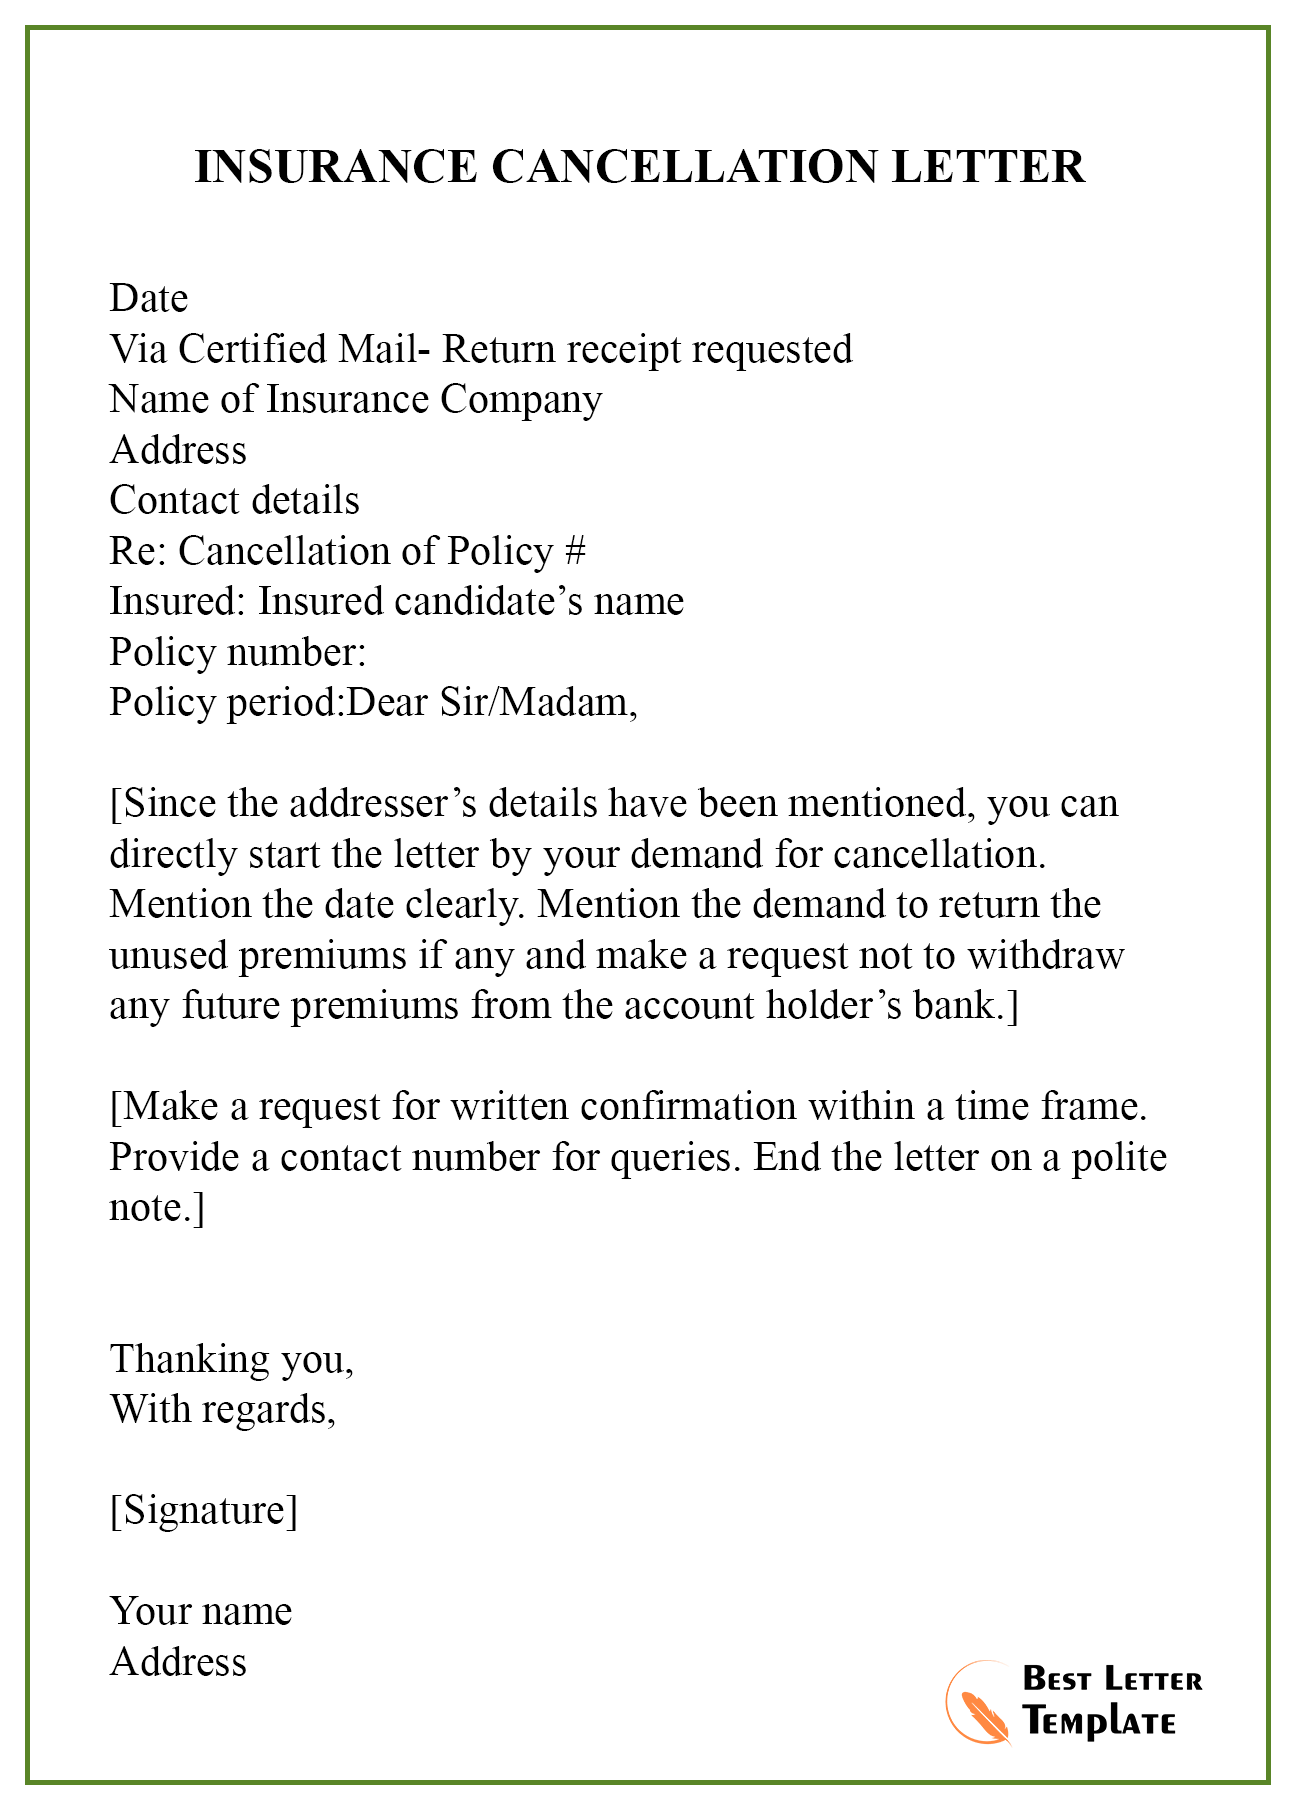 Cancel Insurance Policy Letter from bestlettertemplate.com